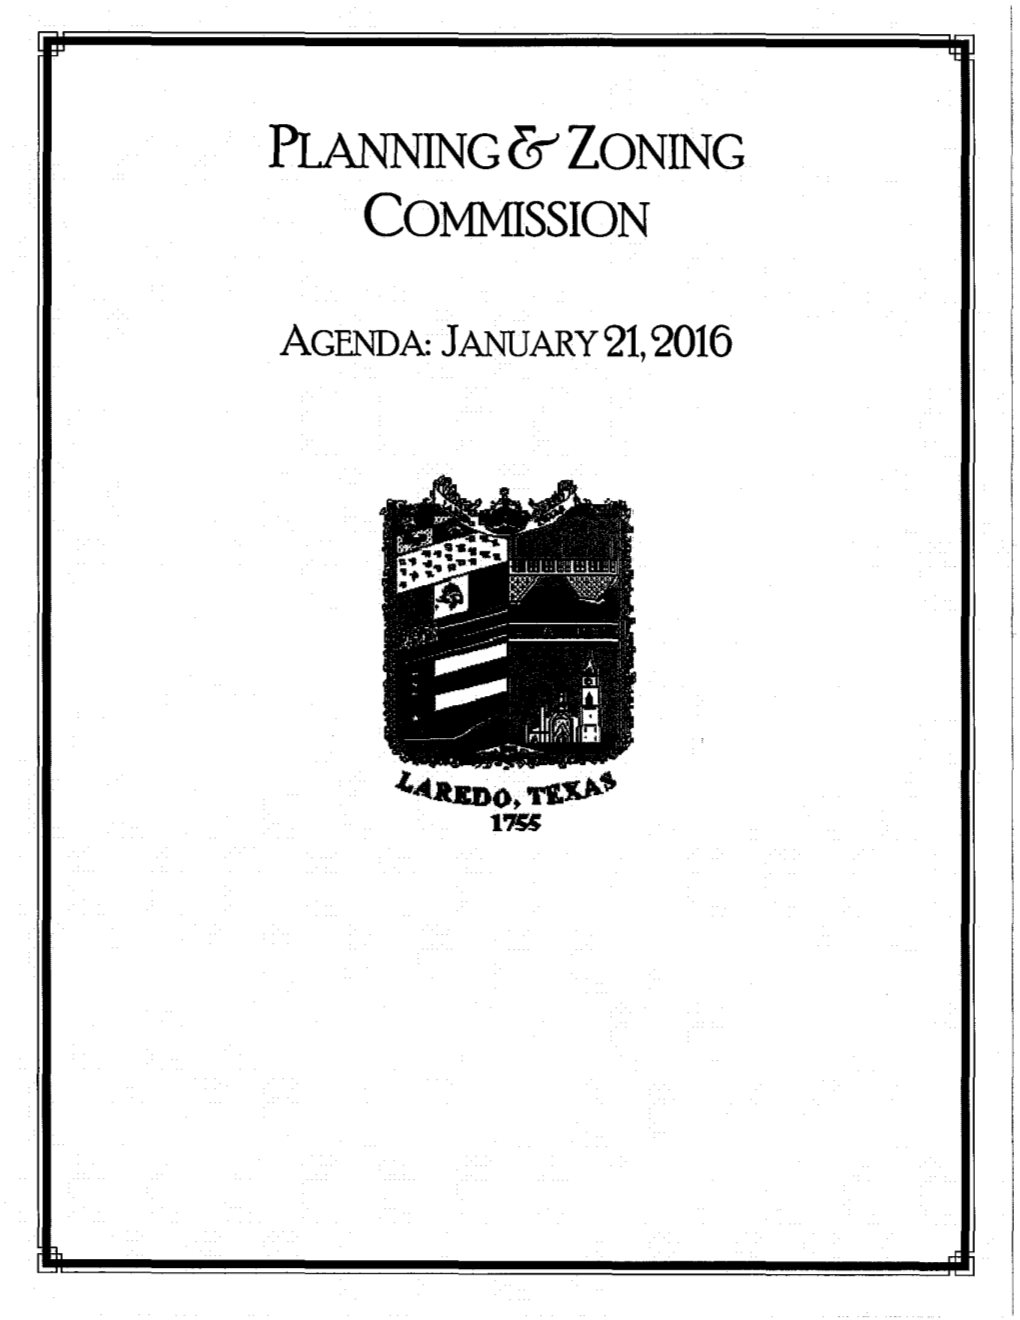 Planning & Zoning Commission